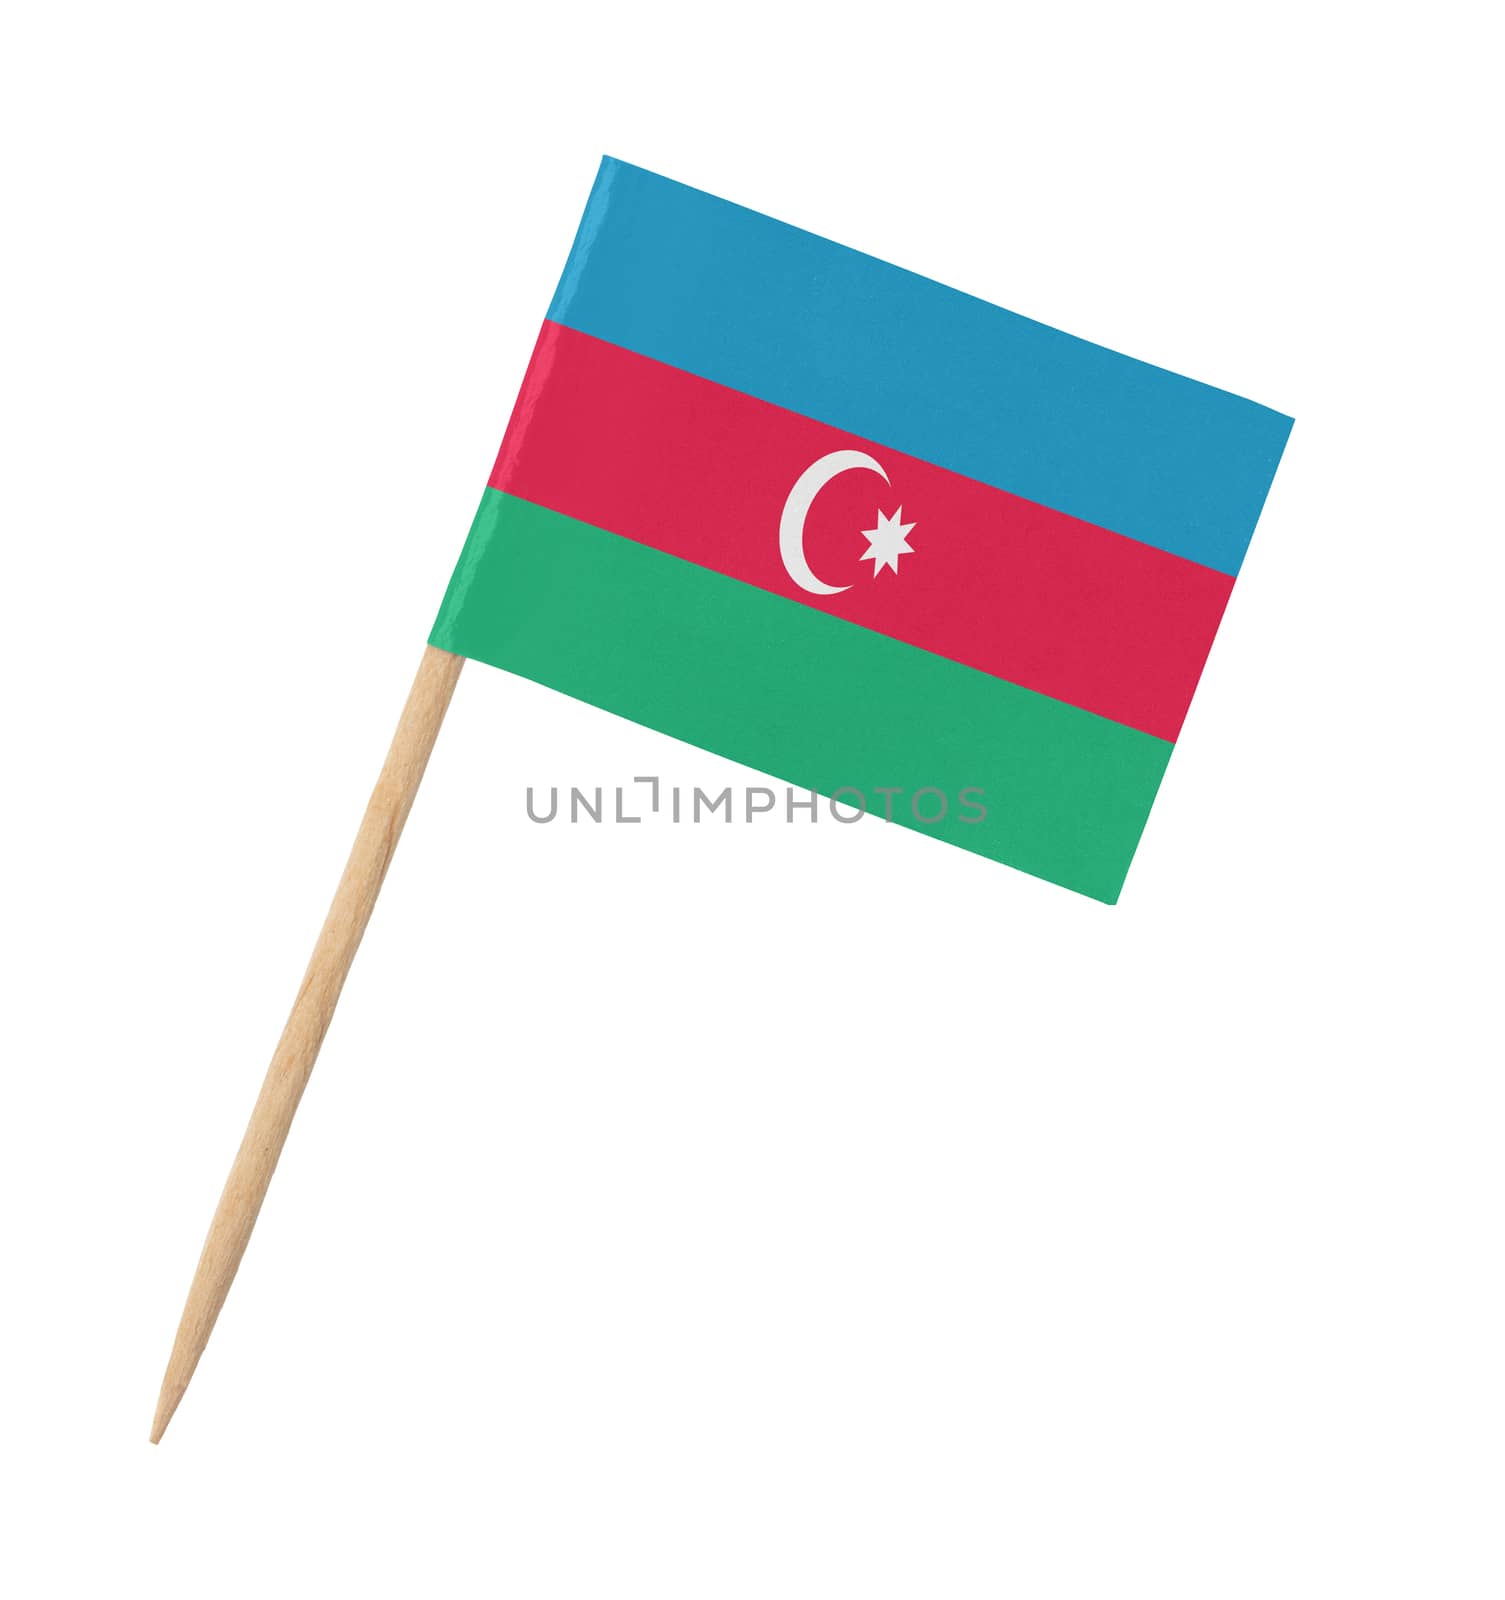 Small paper flag of Azerbaijan on wooden stick, isolated on white